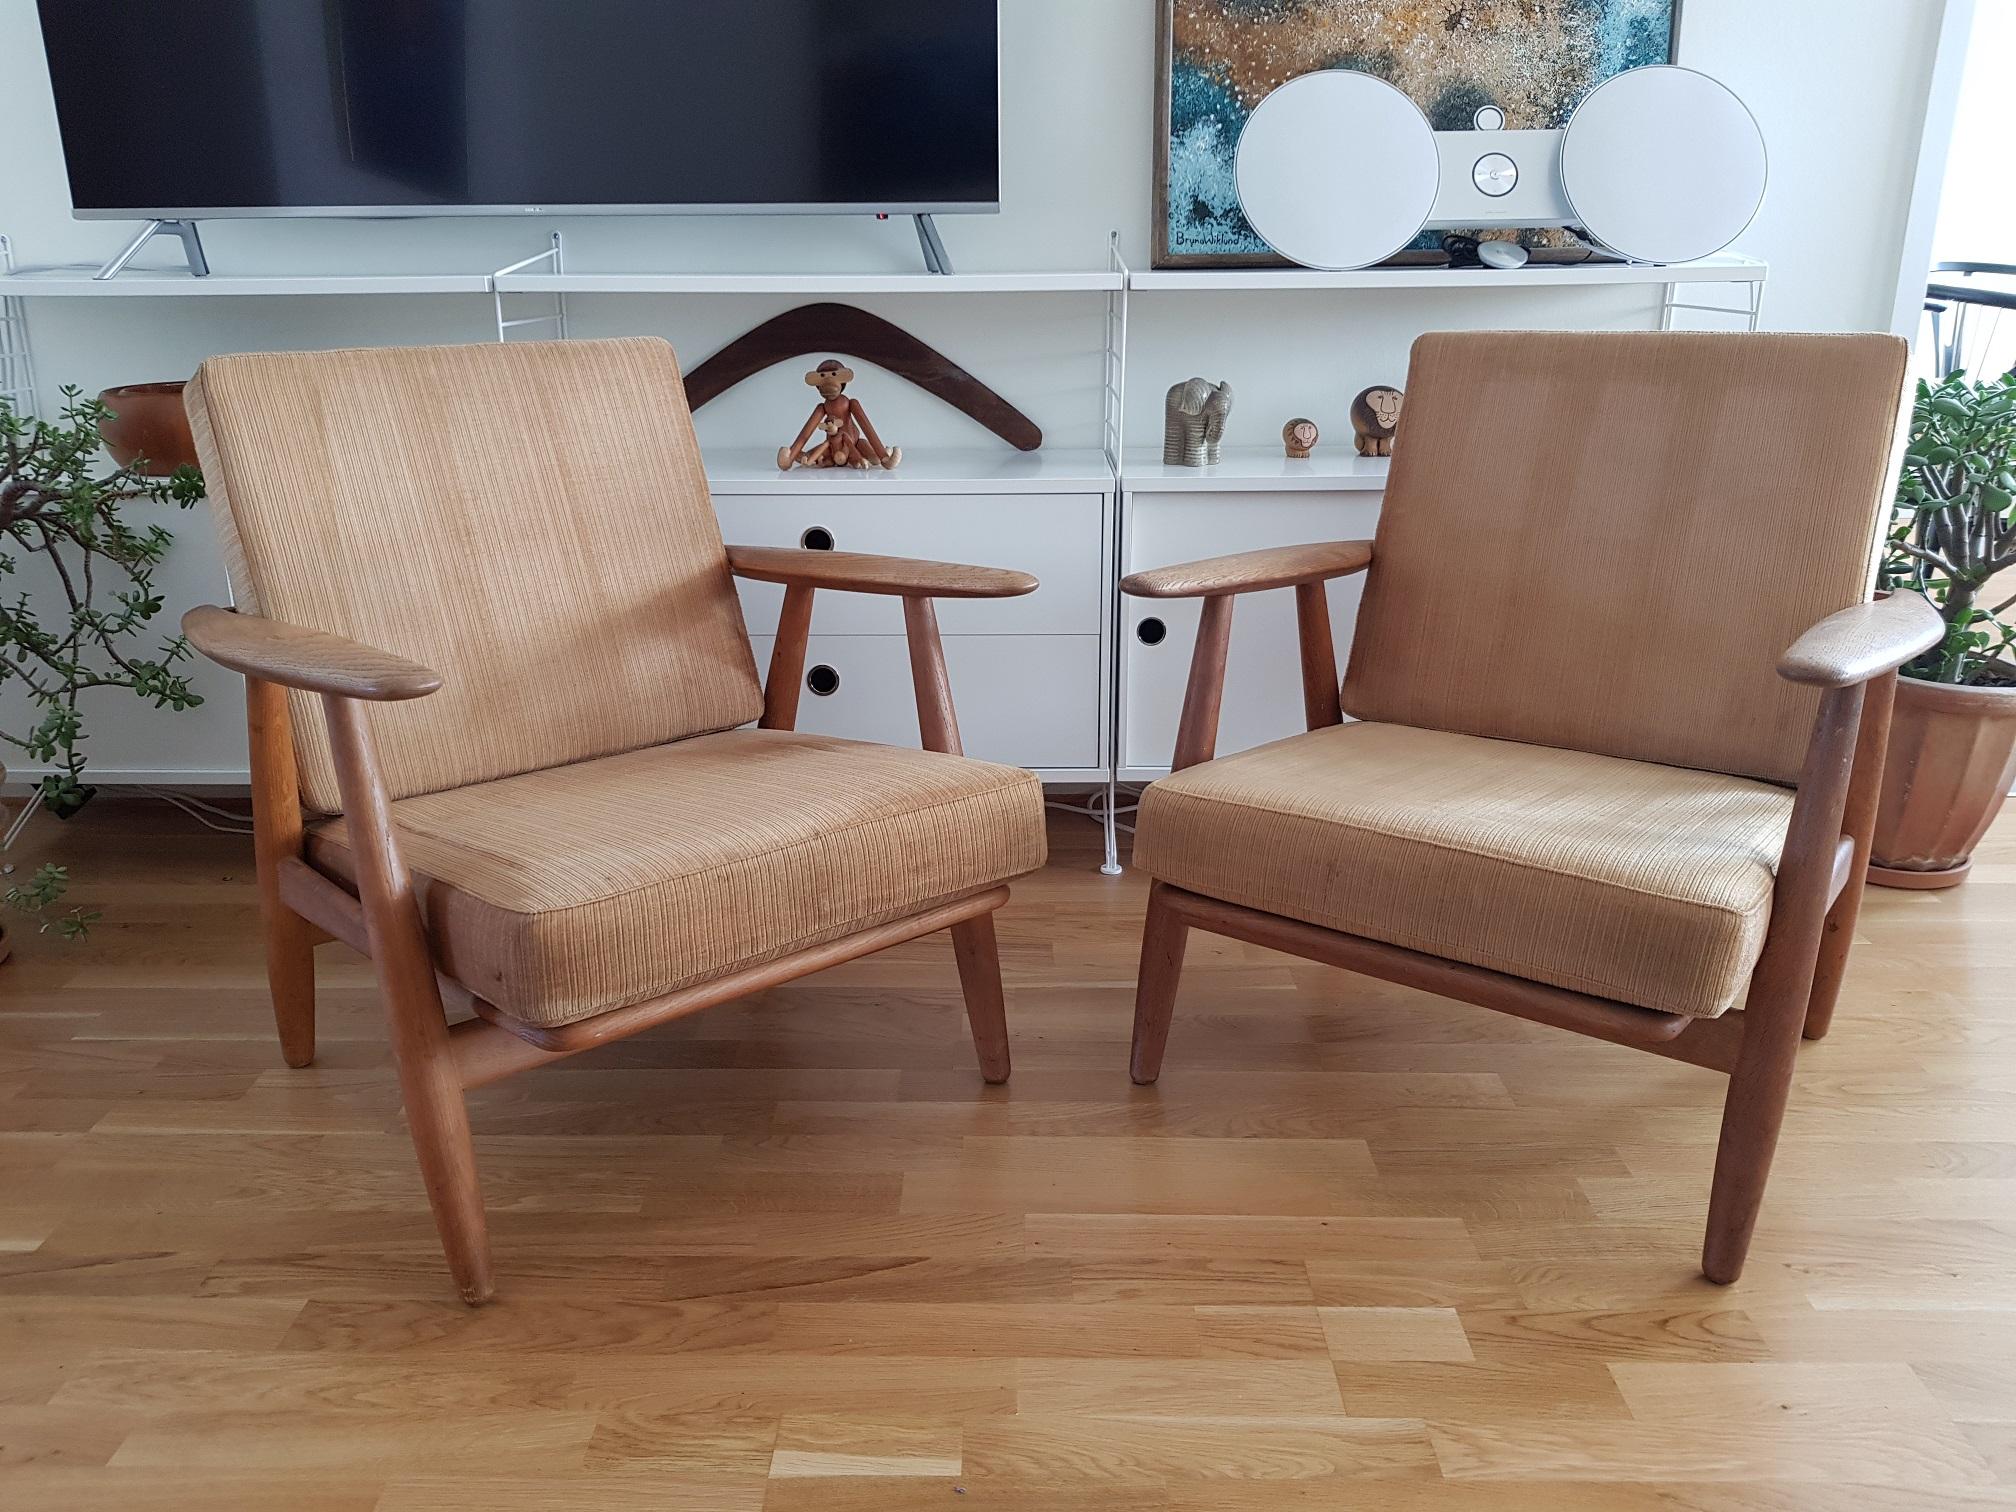 2 vintage cigar chairs made of oak with original cushions. Produced in Denmark by GETAMA in the 1960s. Design by Hans J. Wegner who is considered one of the all-time greatest mid-century Scandinavian furniture designers. These 2 lounge chairs have